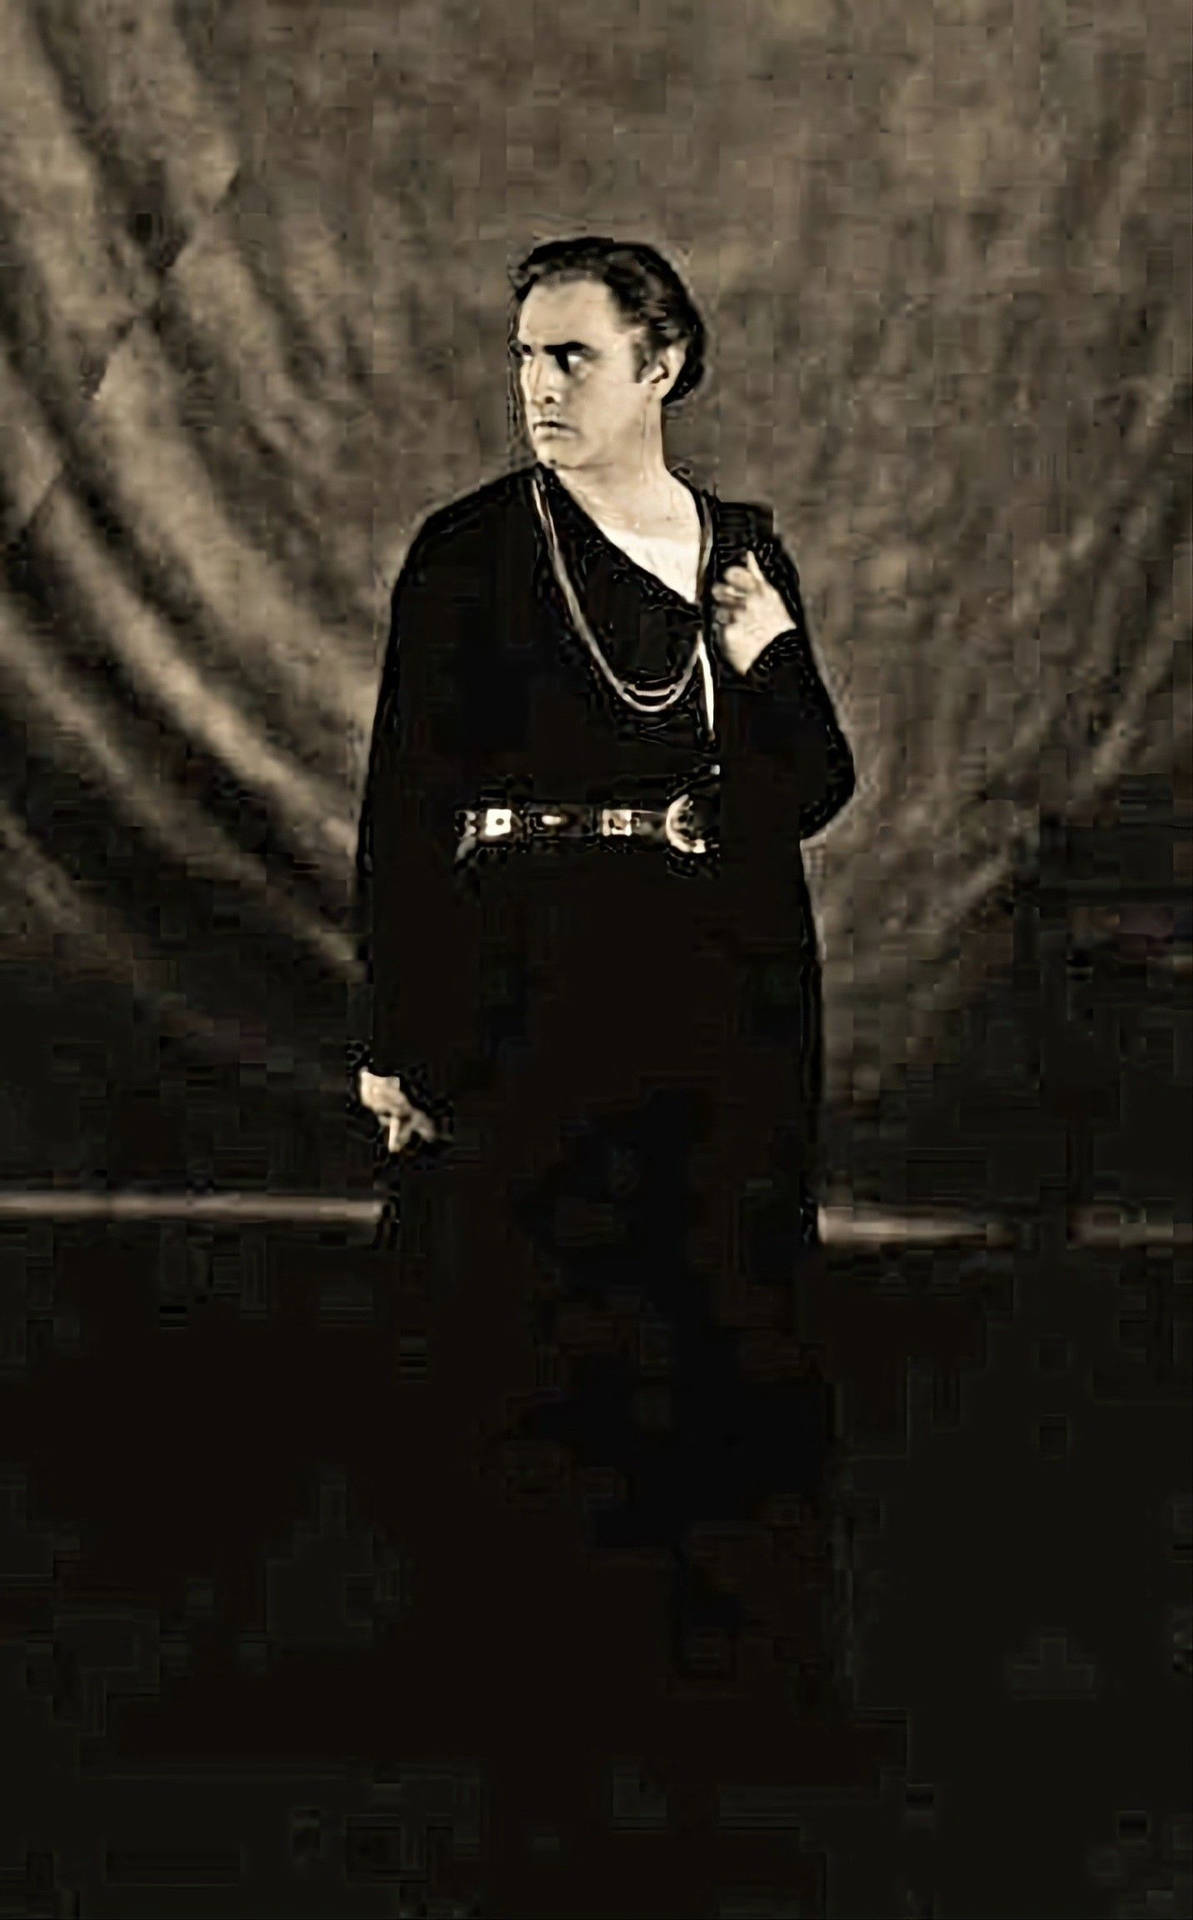 John Barrymore As Hamlet In Classic Black And White Image Background